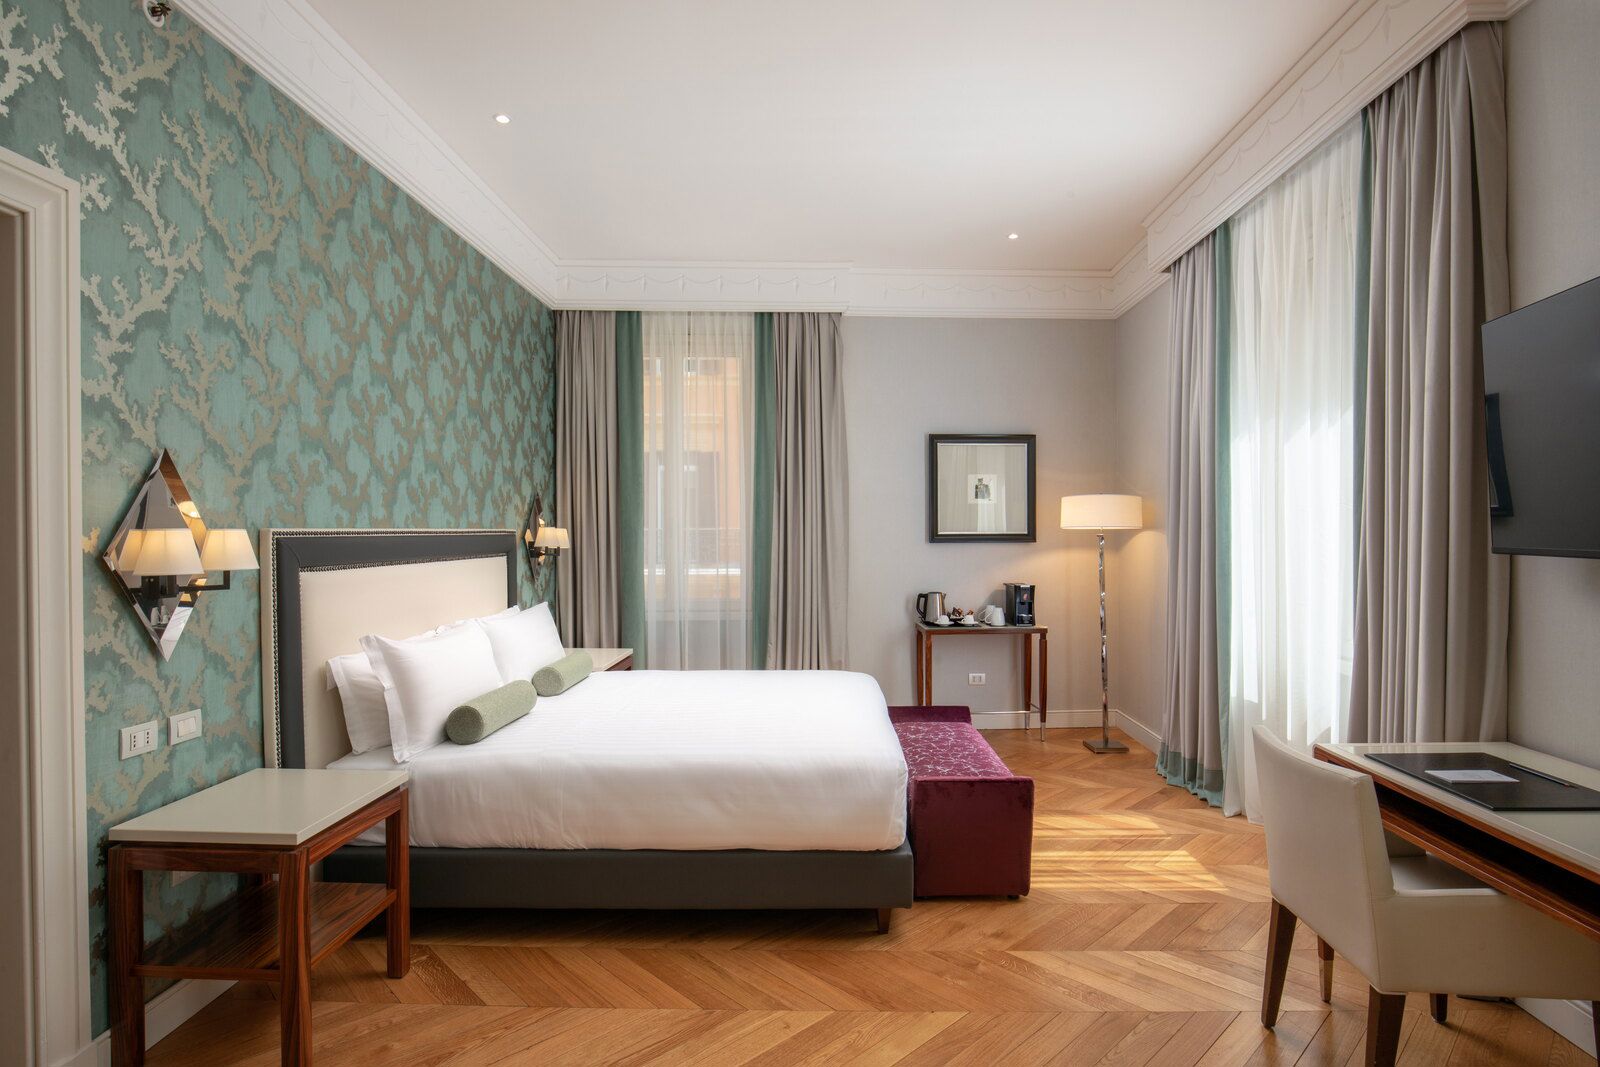 Luxury hotel with meeting rooms near Piazza del Popolo Rome 2